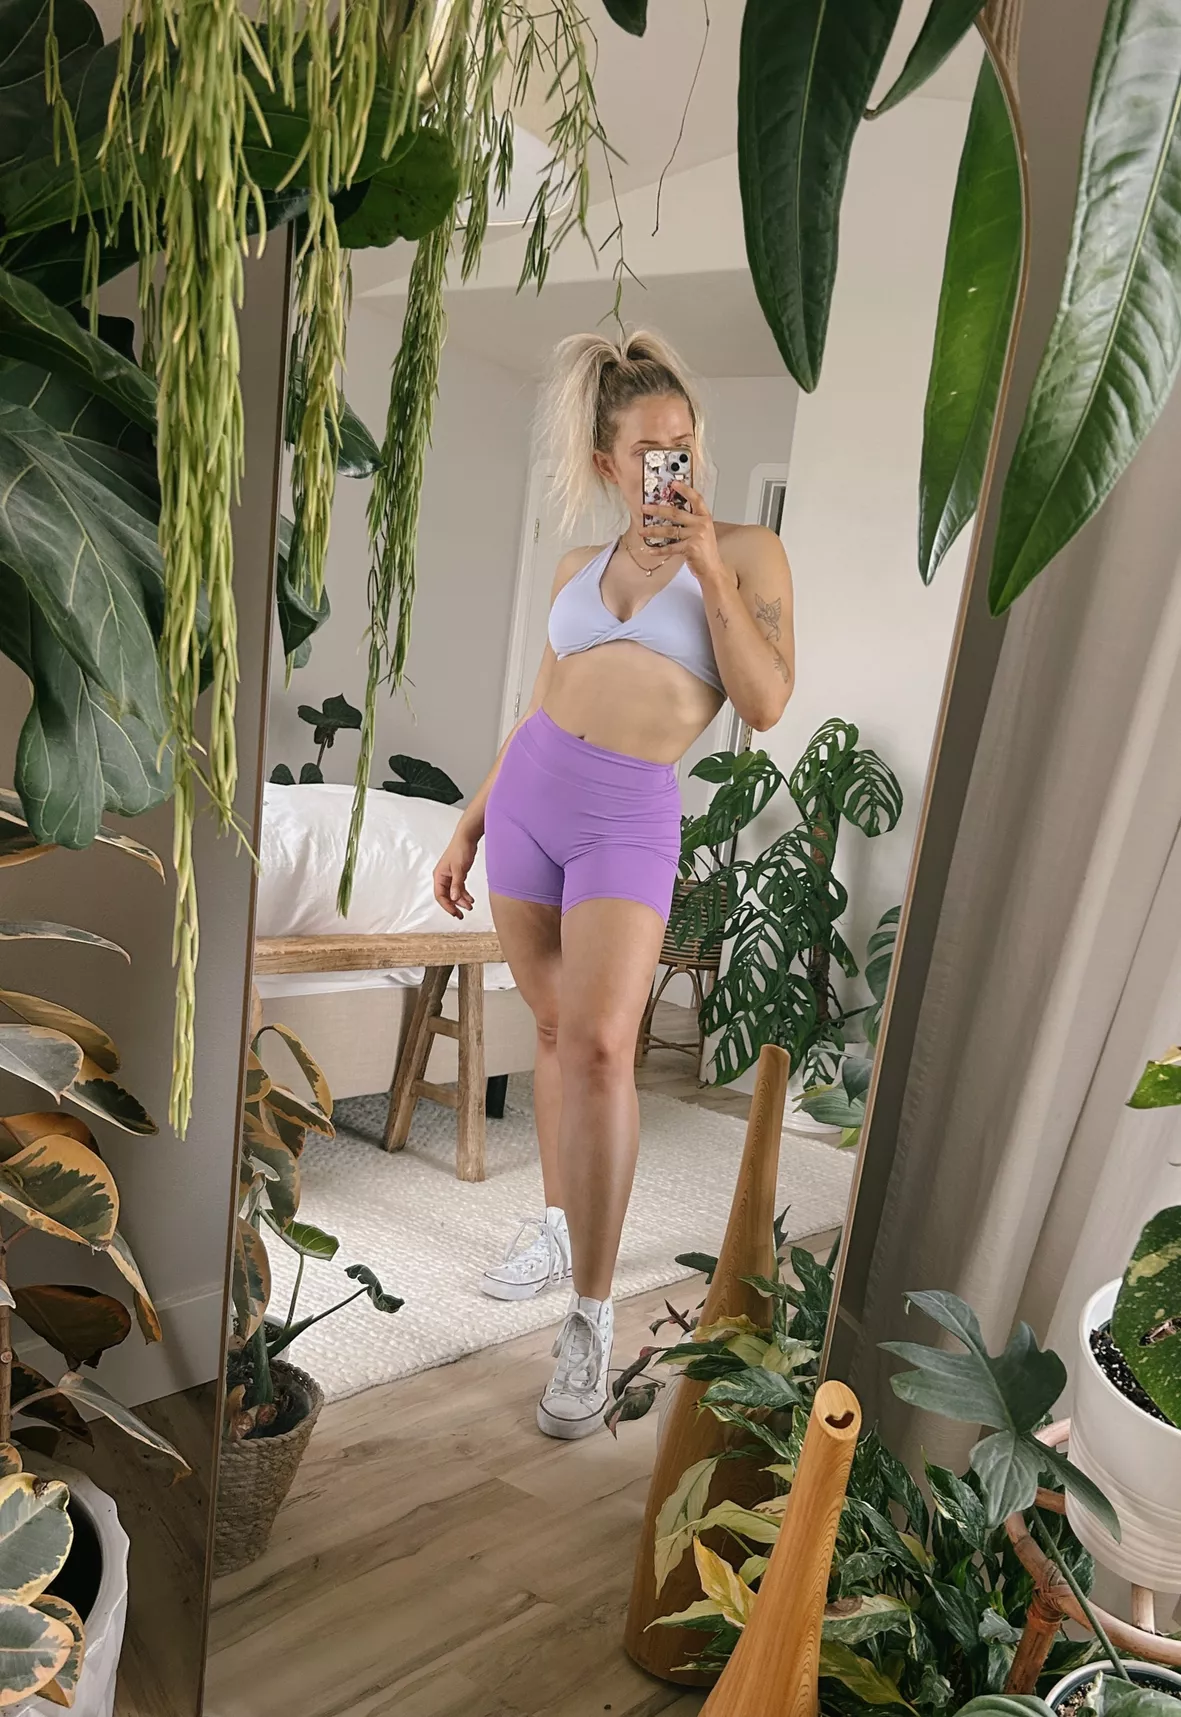 Feminine woman wearing yoga shorts and sports bra in the fitness